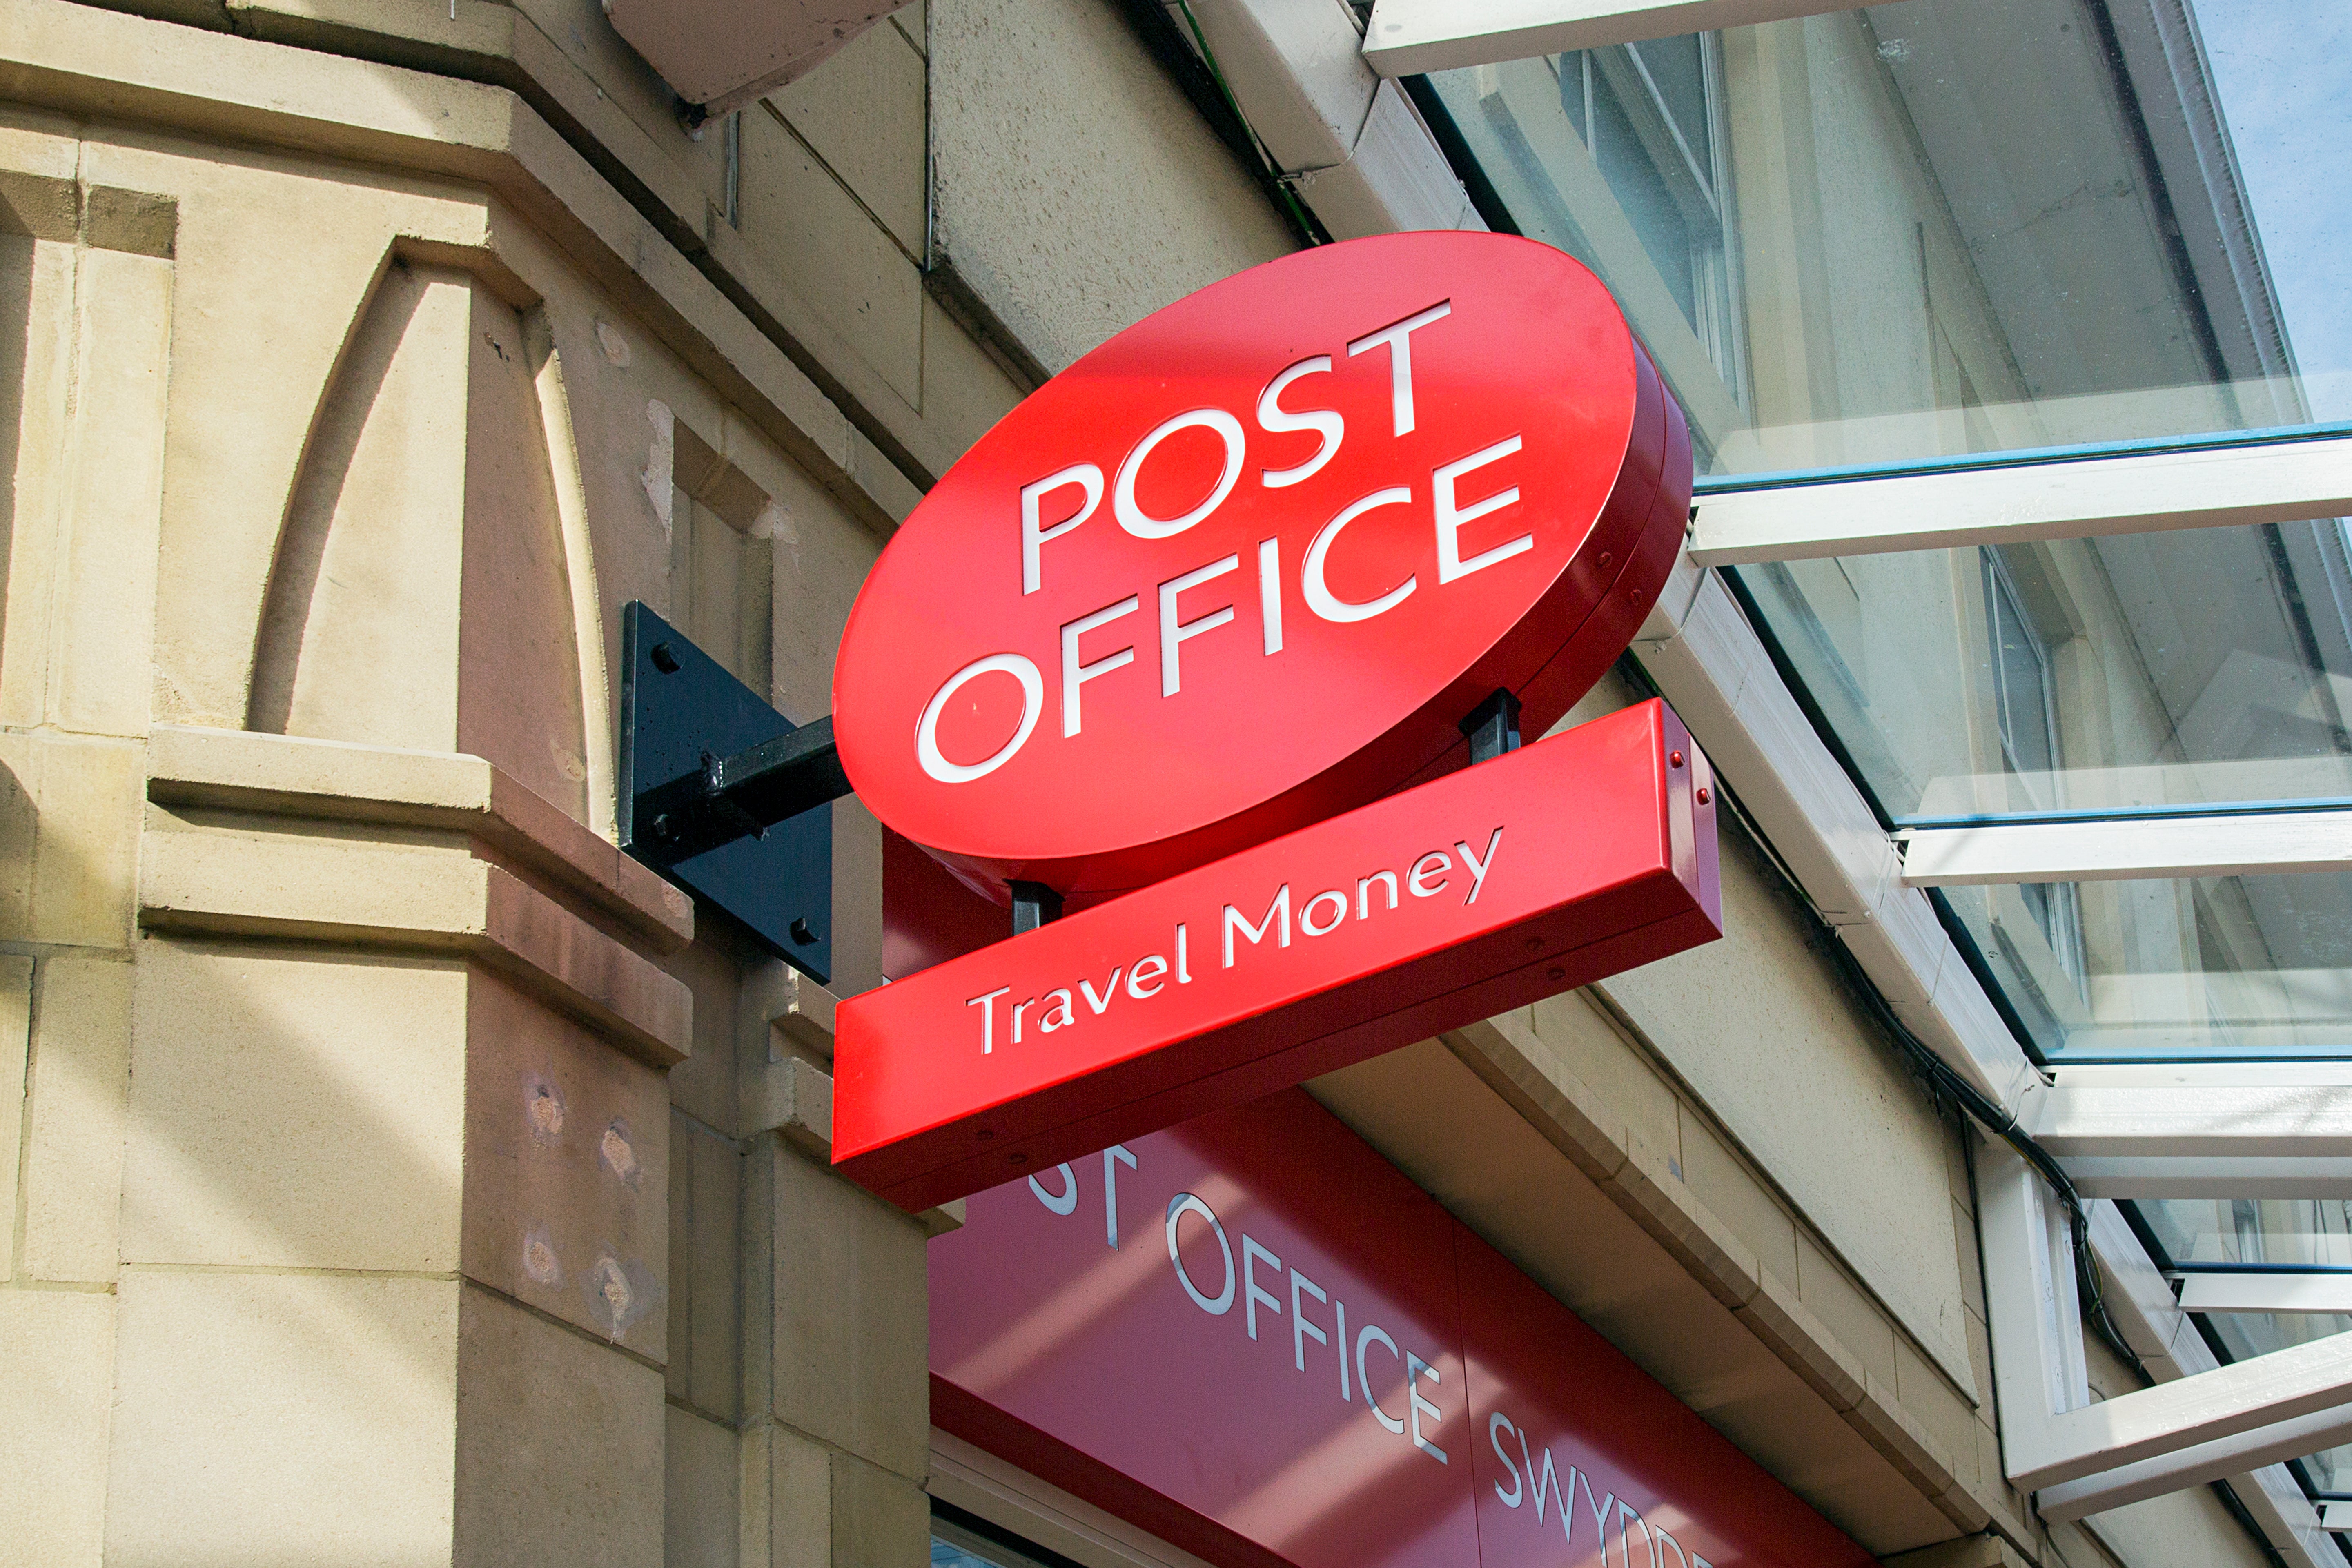 Coverage of the Post Office debacle raises uncomfortable questions about the priorities of sections of the media and political classes